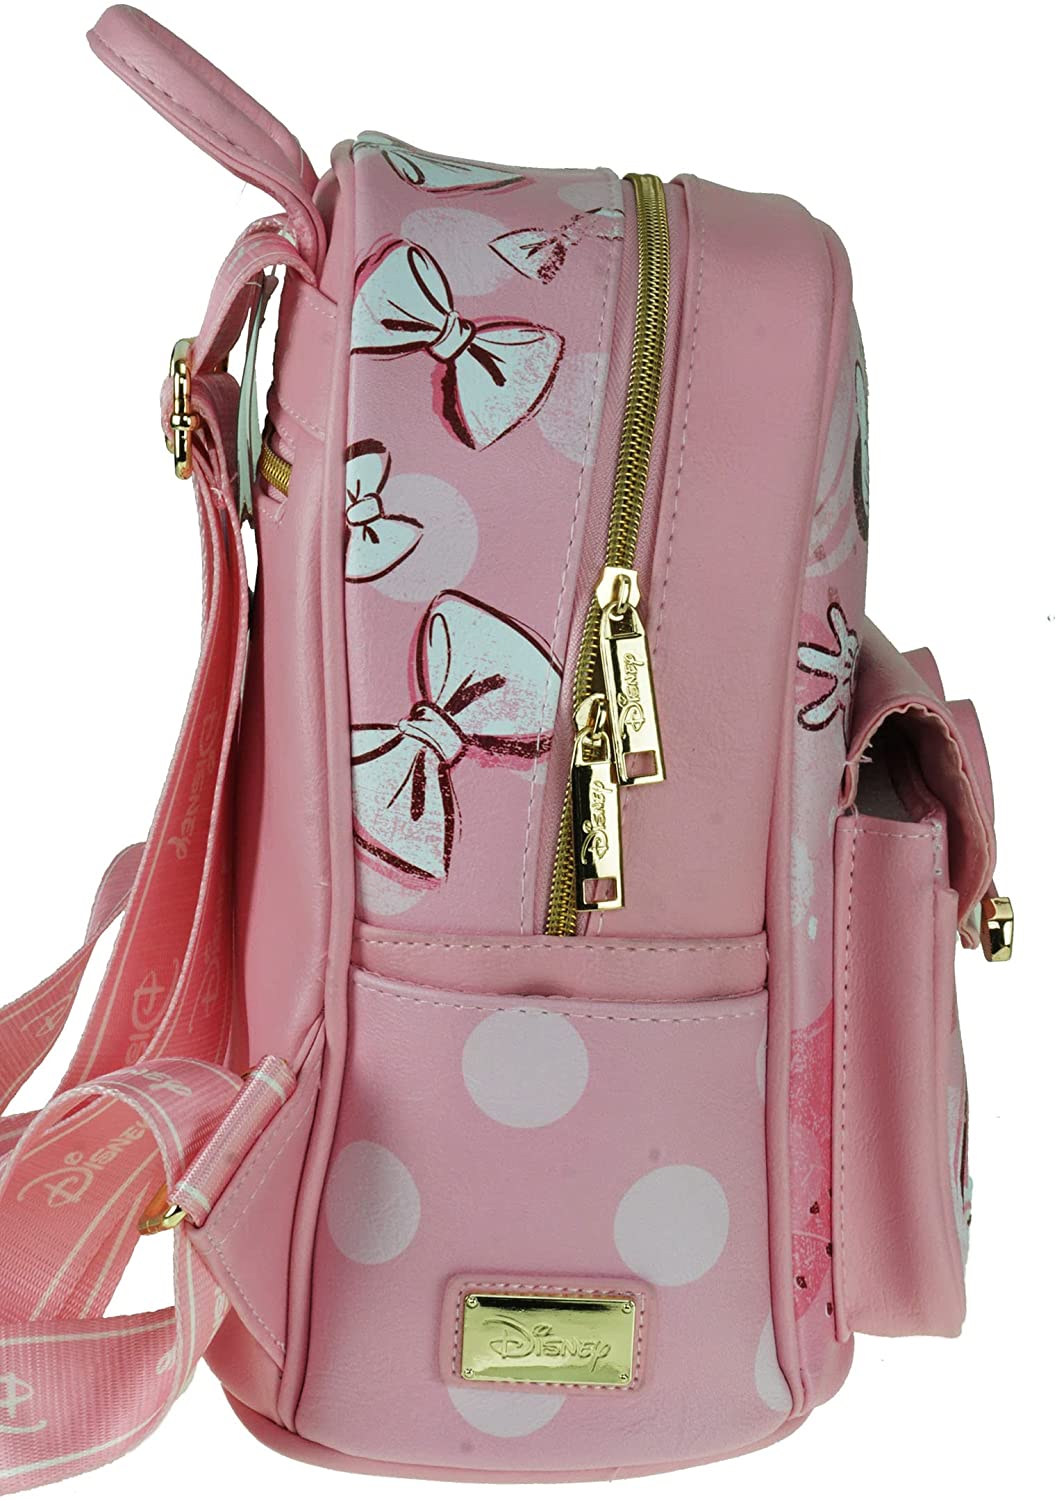 Minnie Mouse 11" Vegan Leather Mini Backpack - A21770 - GTE Zone